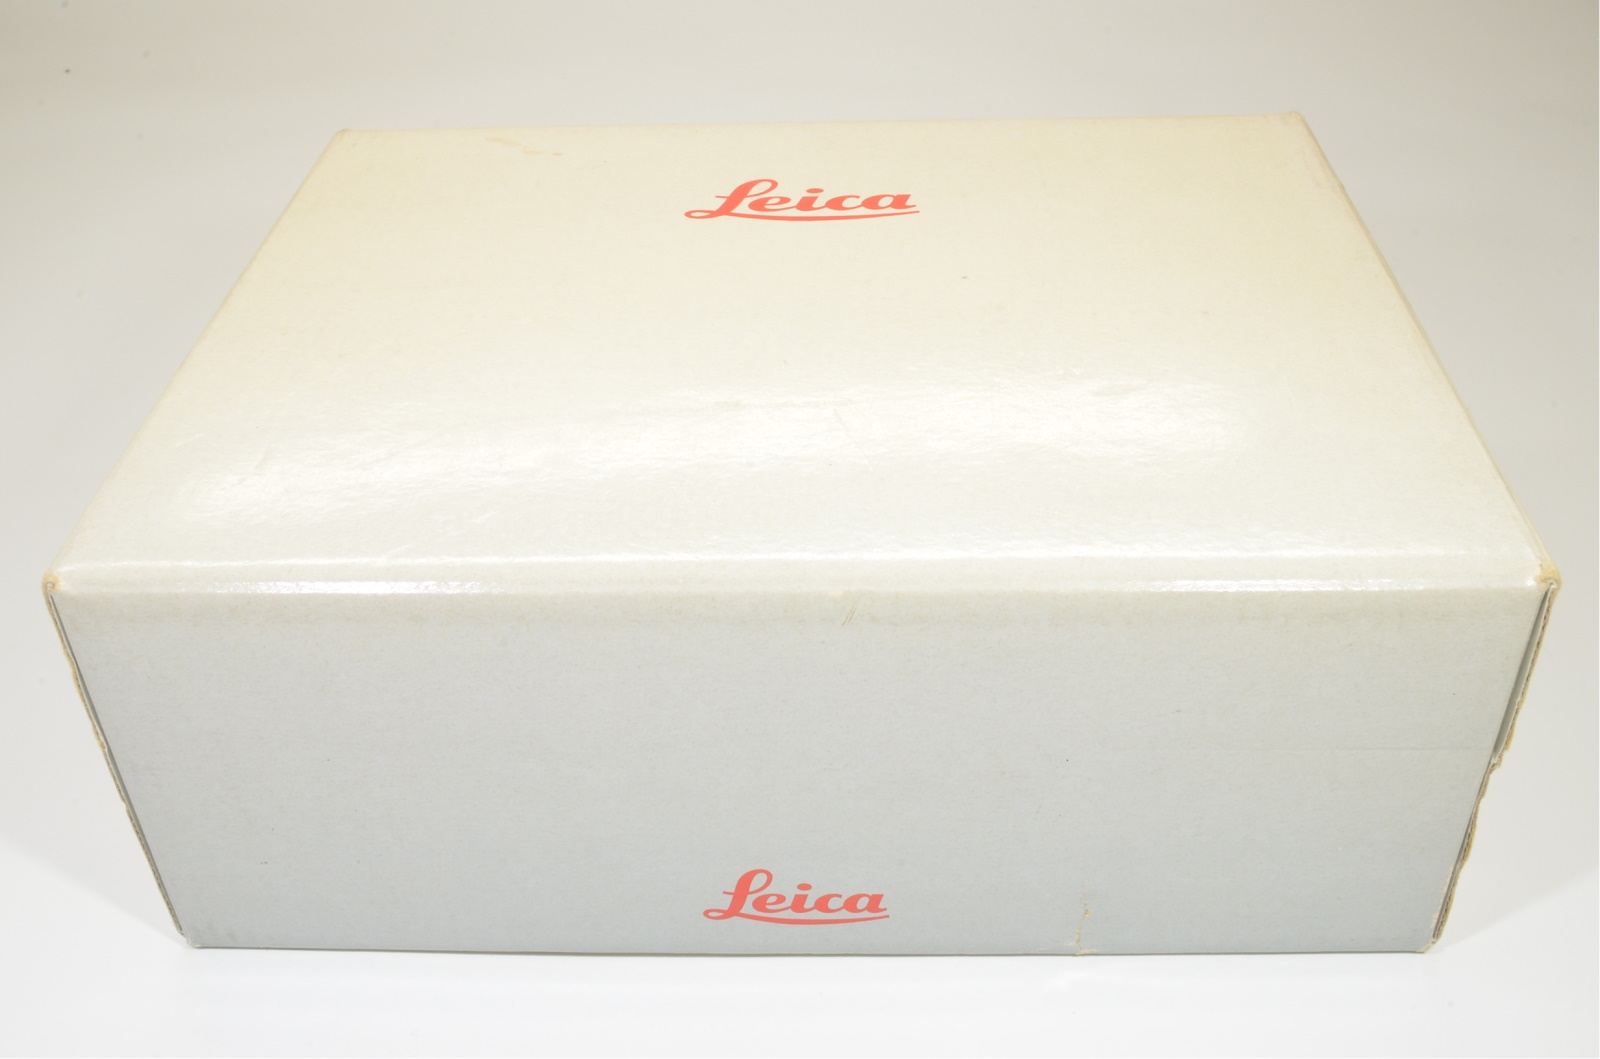 leica m6 empty box 10414, plastic case, strap, and documents from japan